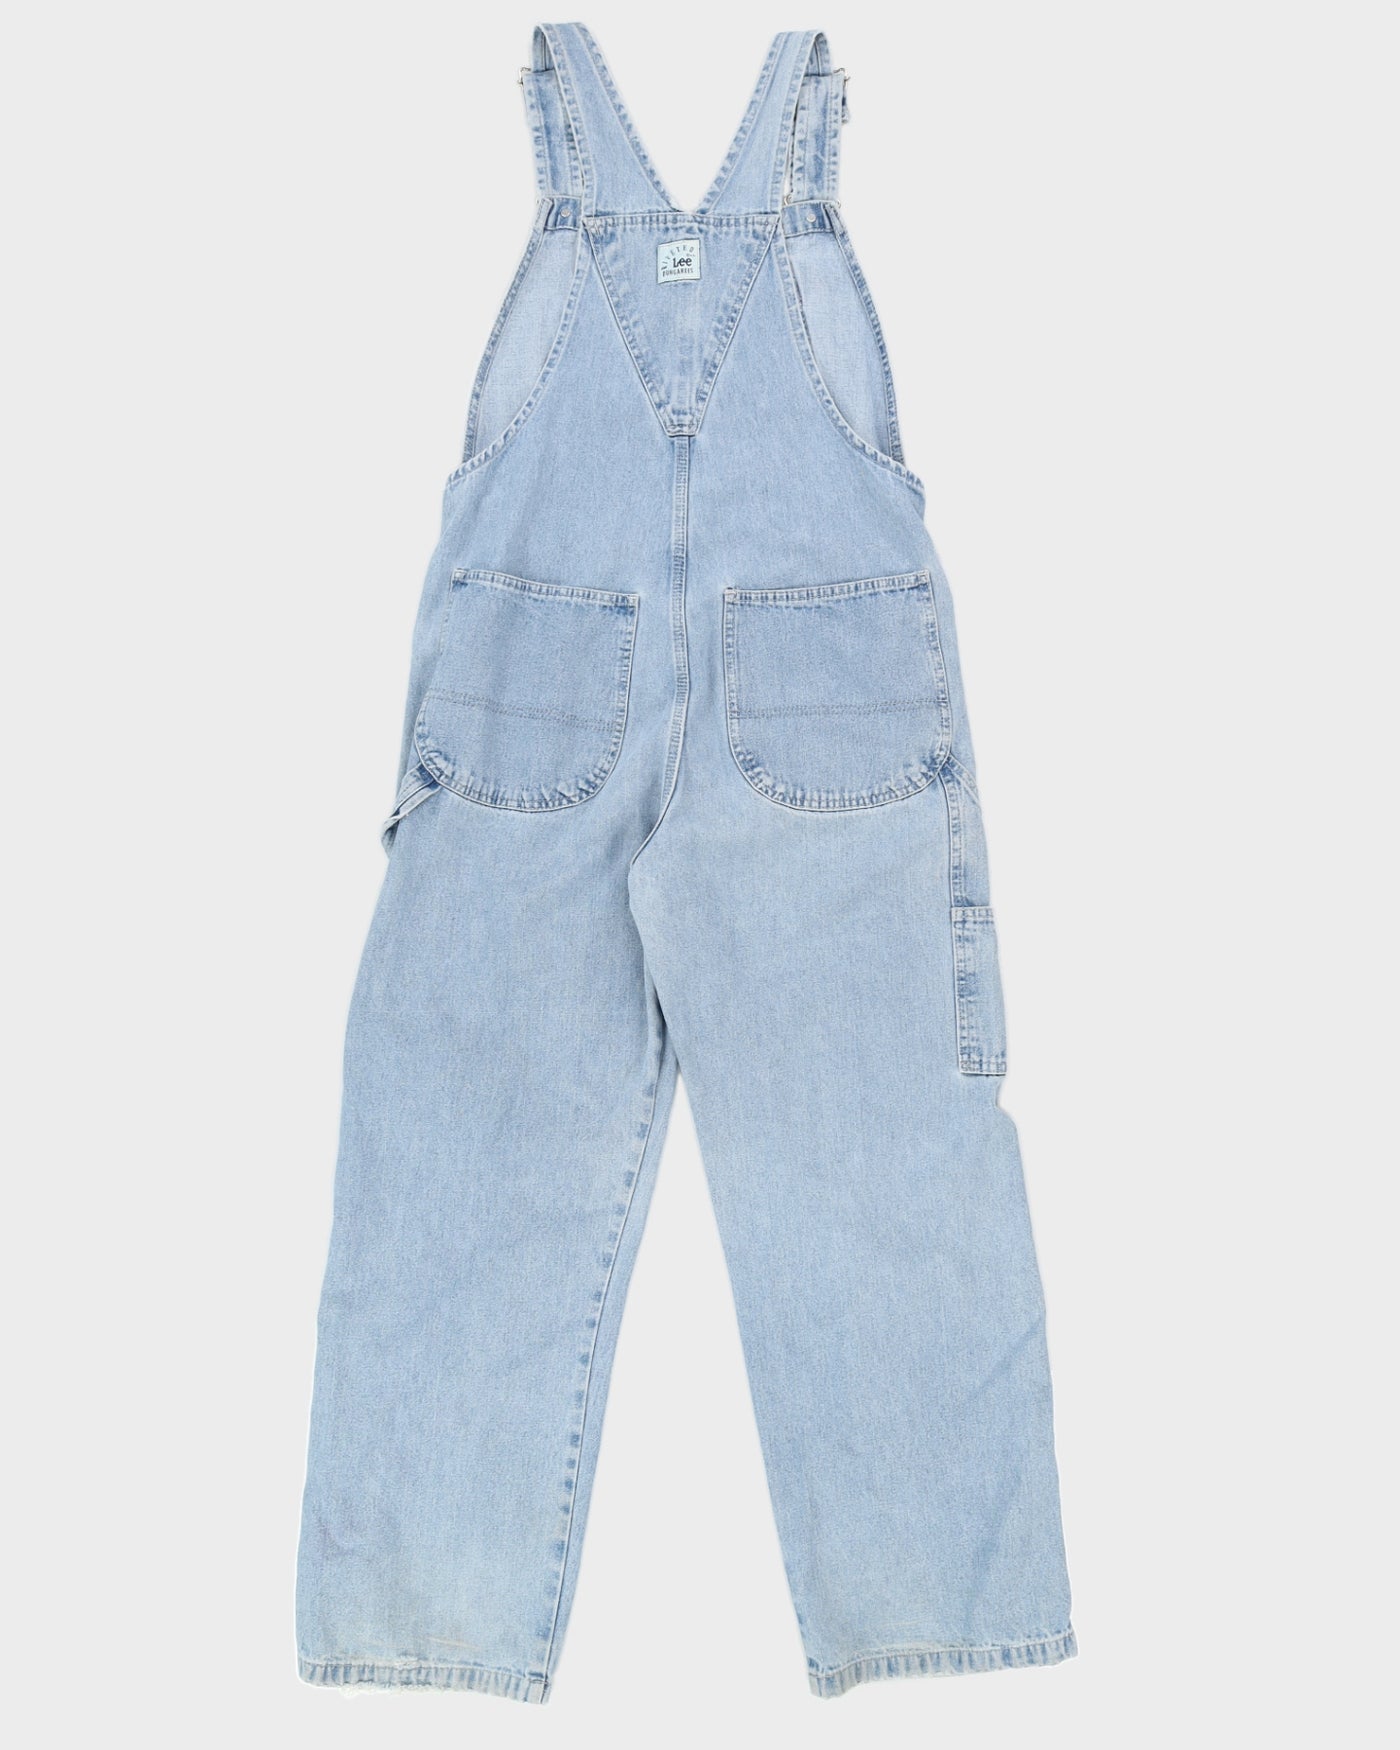 Lee Long Dungarees - S